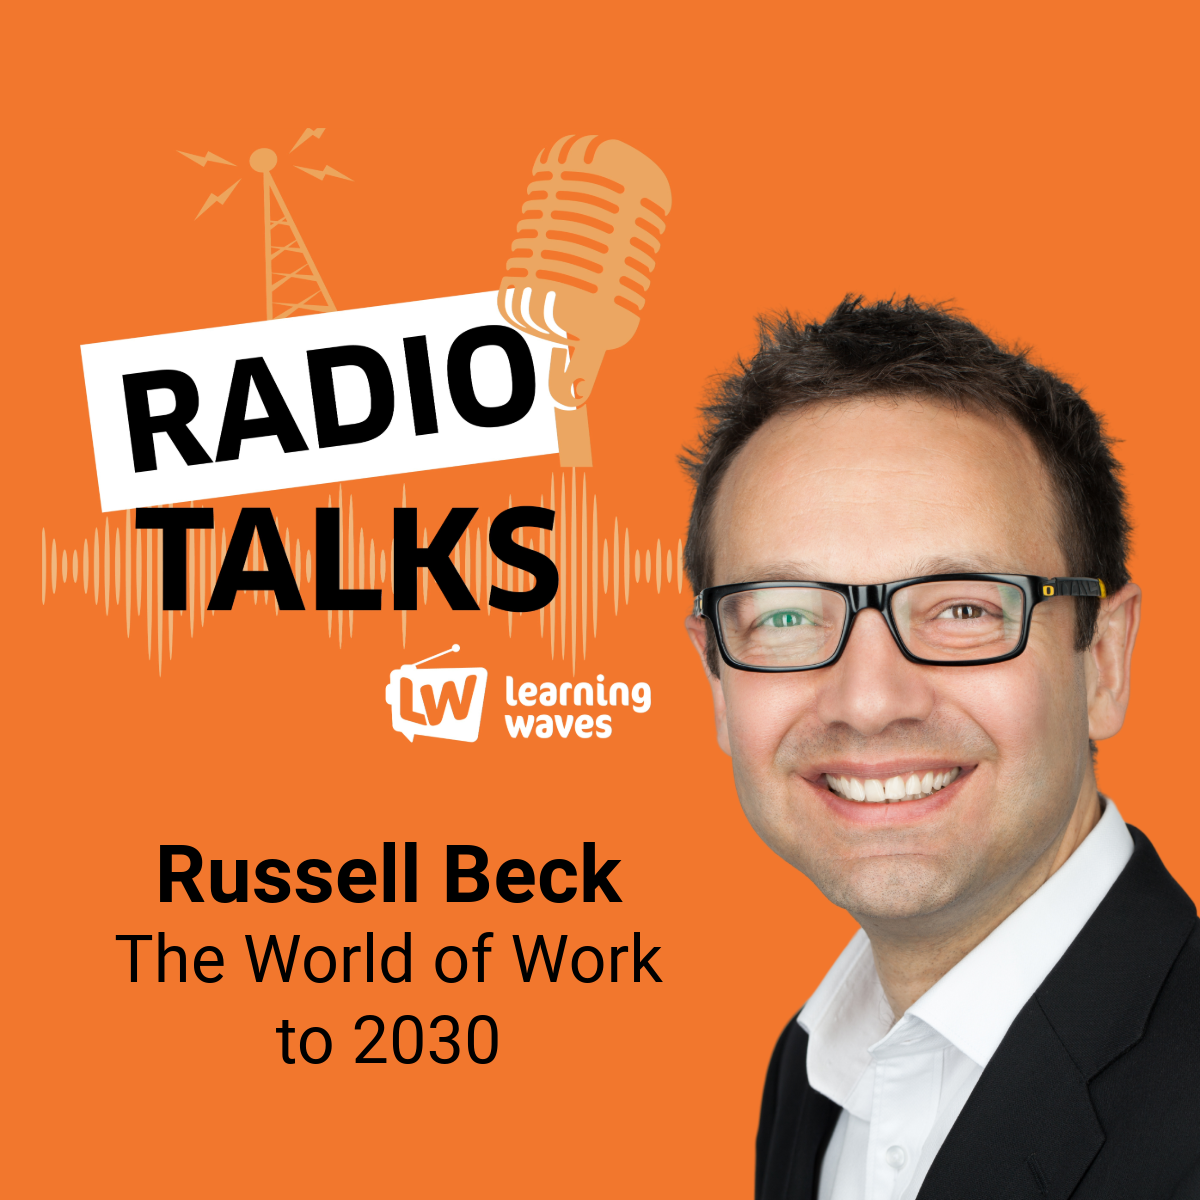 RadioTalks Podcast 17 - The World of Work to 2030: Insights from Russell Beck